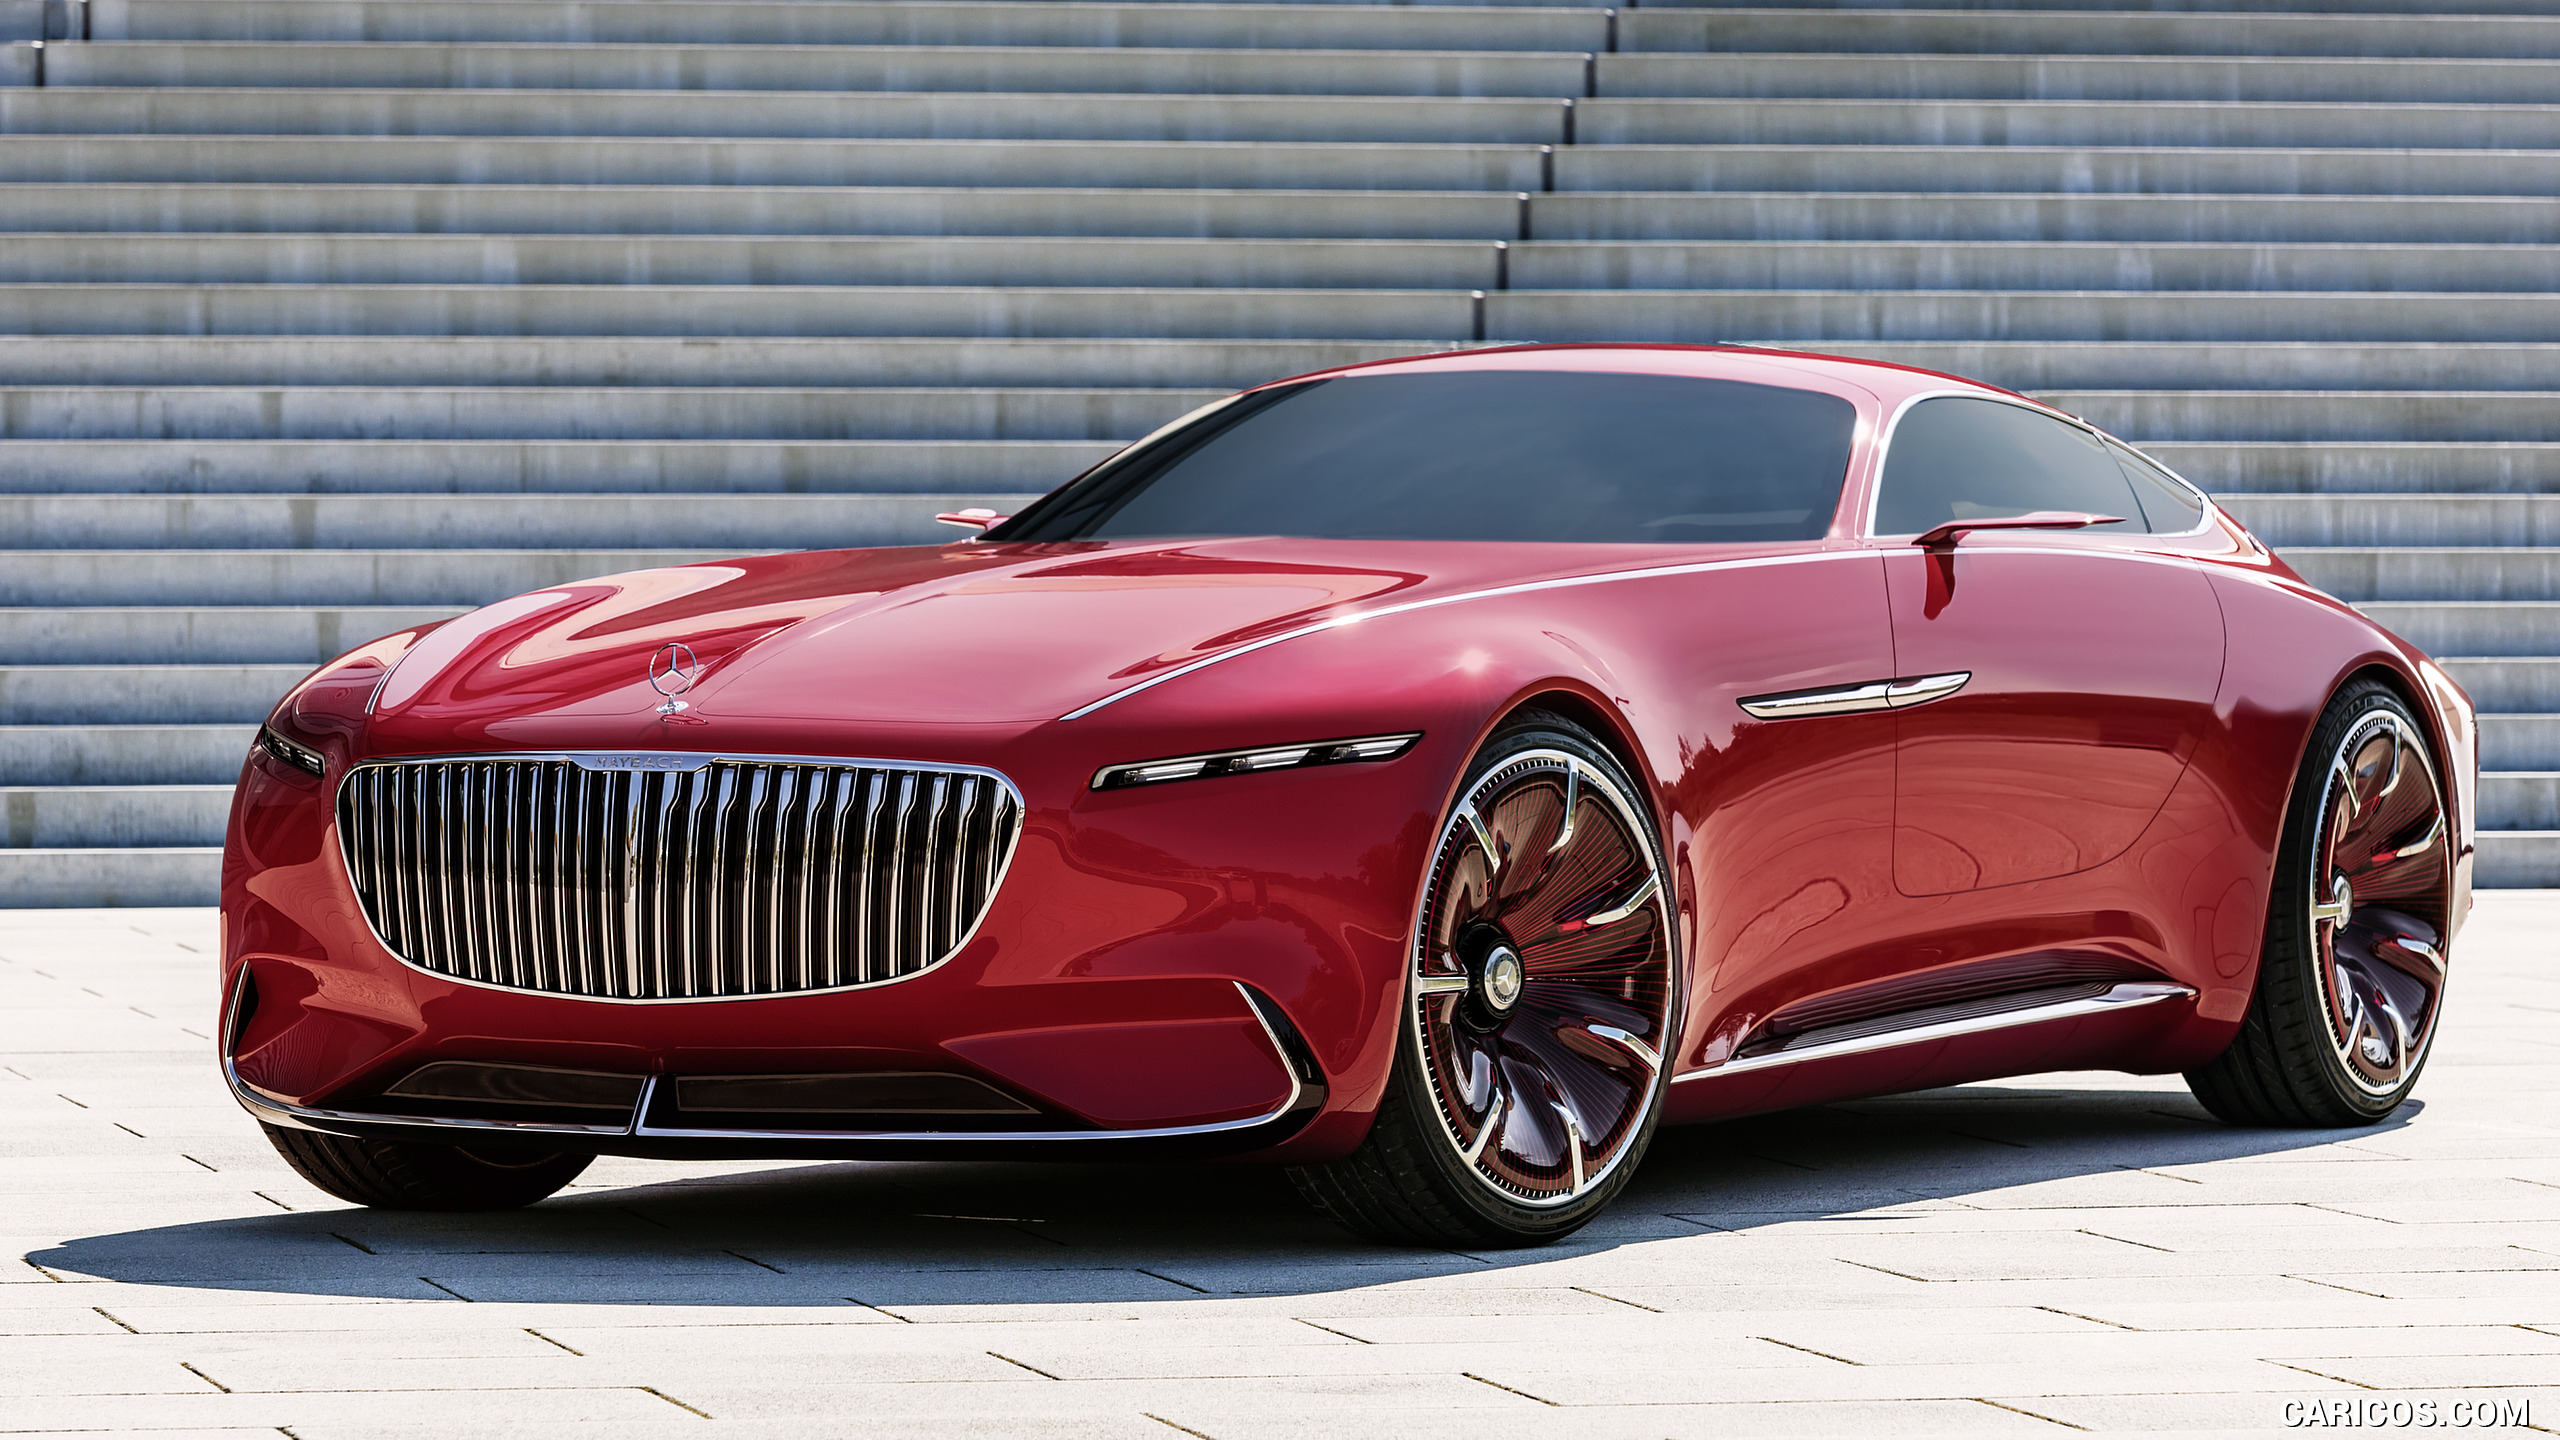 2016 Mercedes-Maybach 6 Concept - Front Three-Quarter, #31 of 31